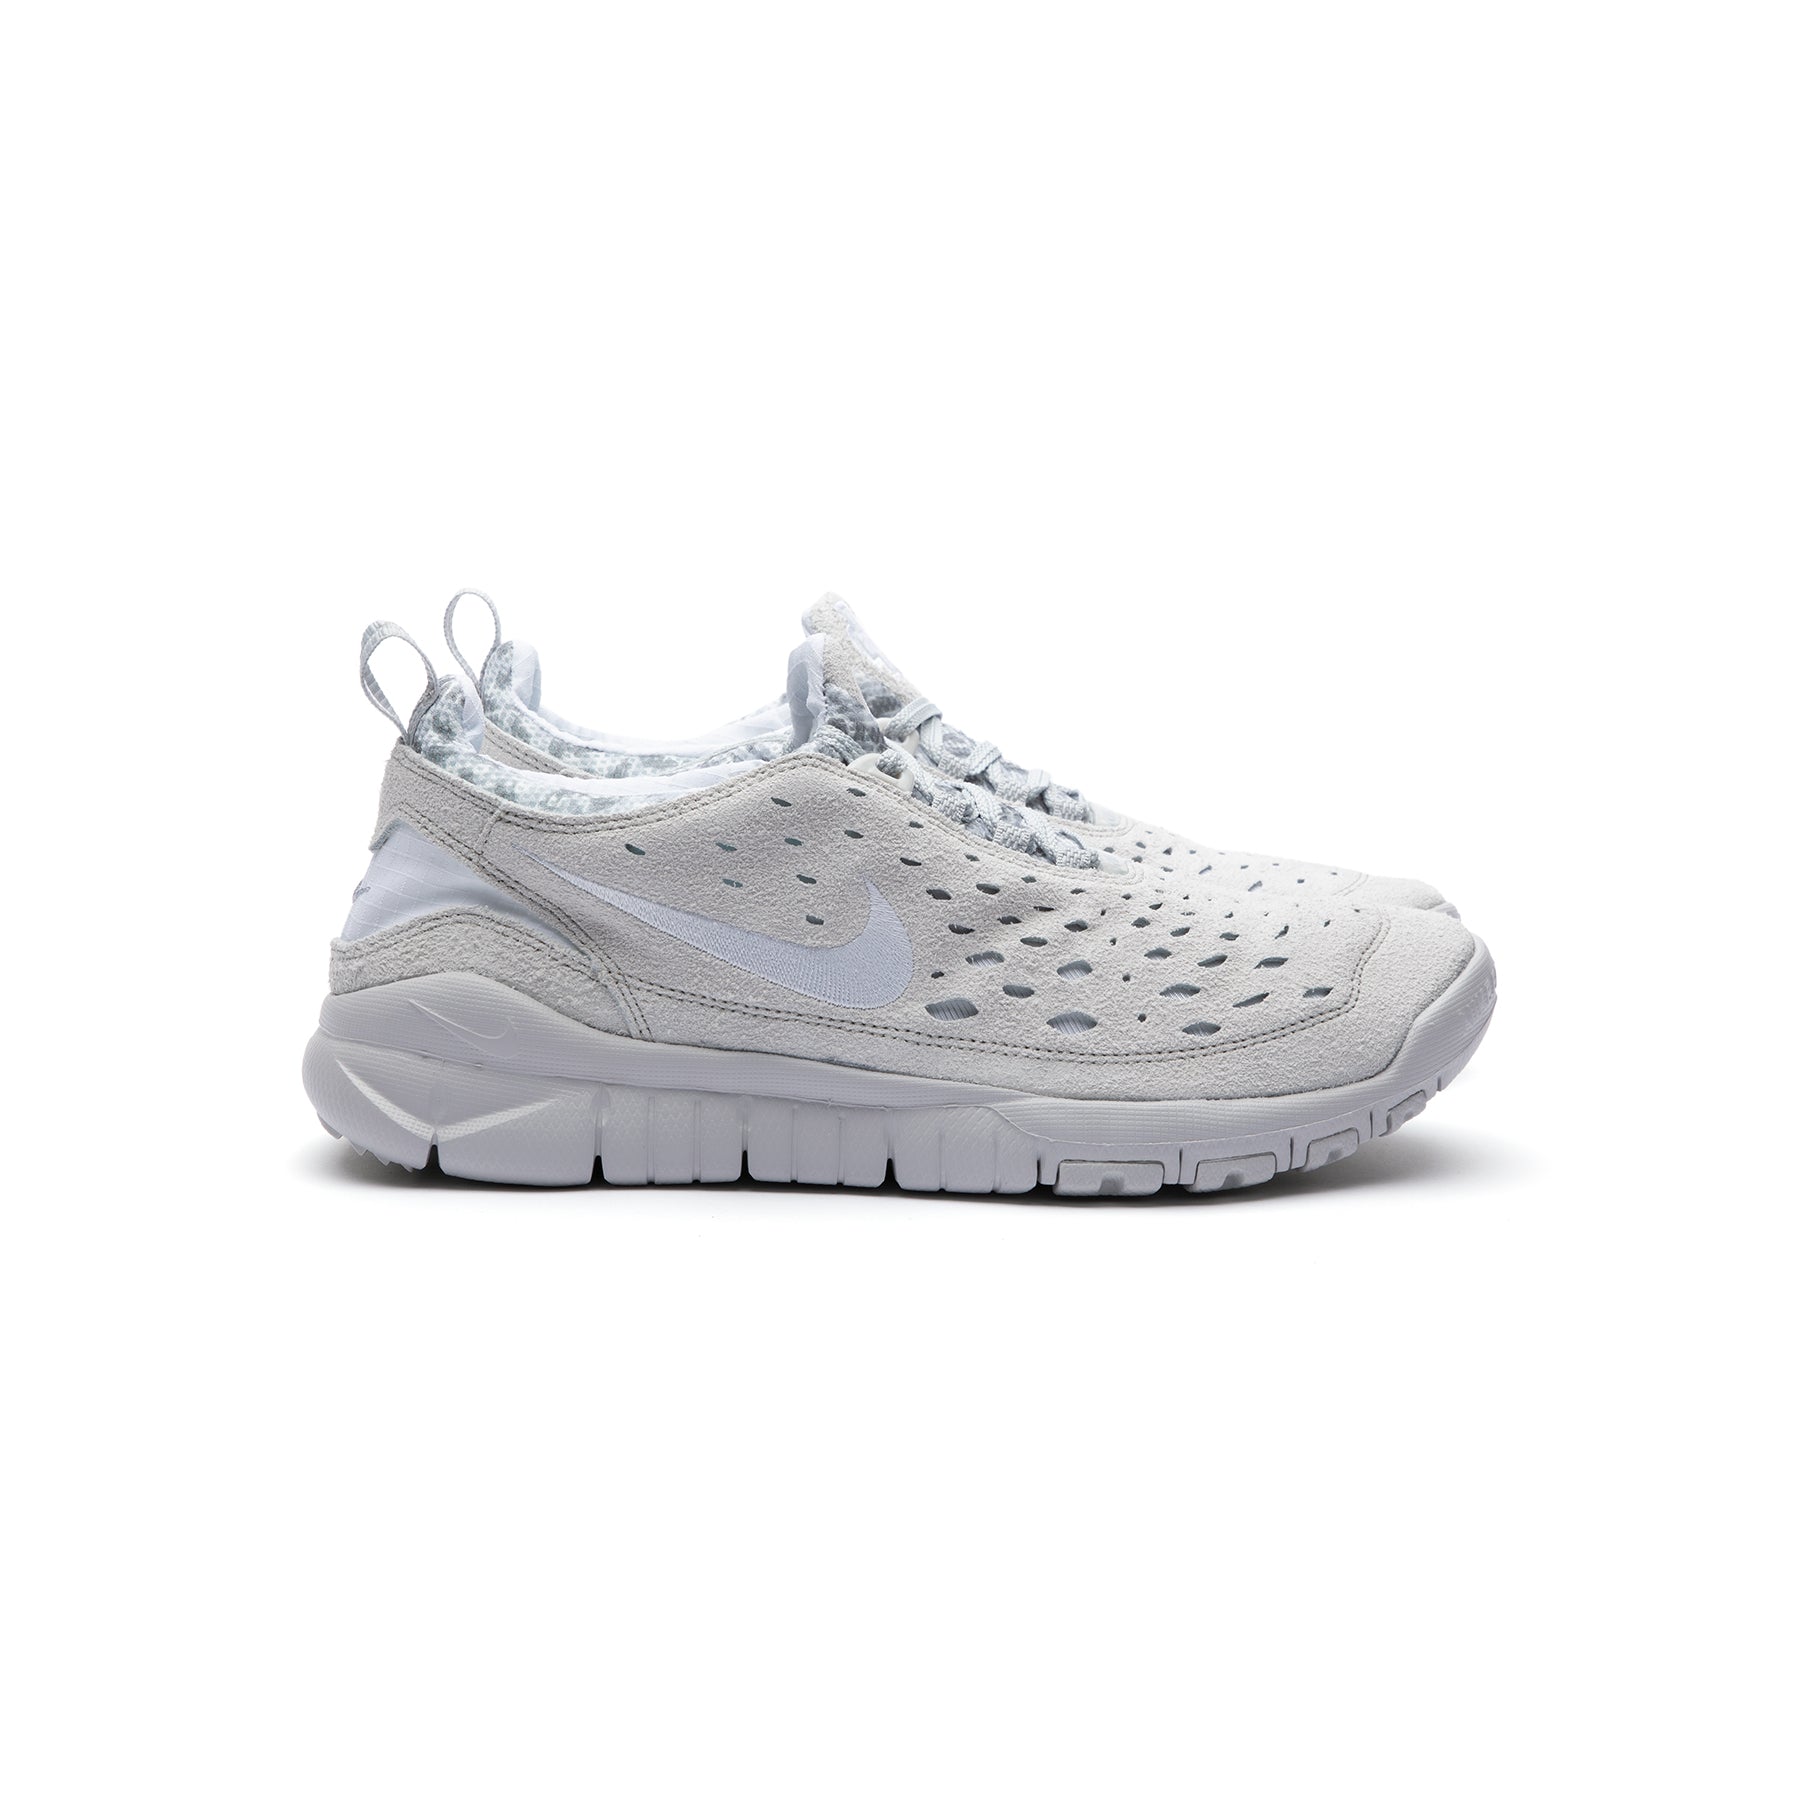 concepts nike free